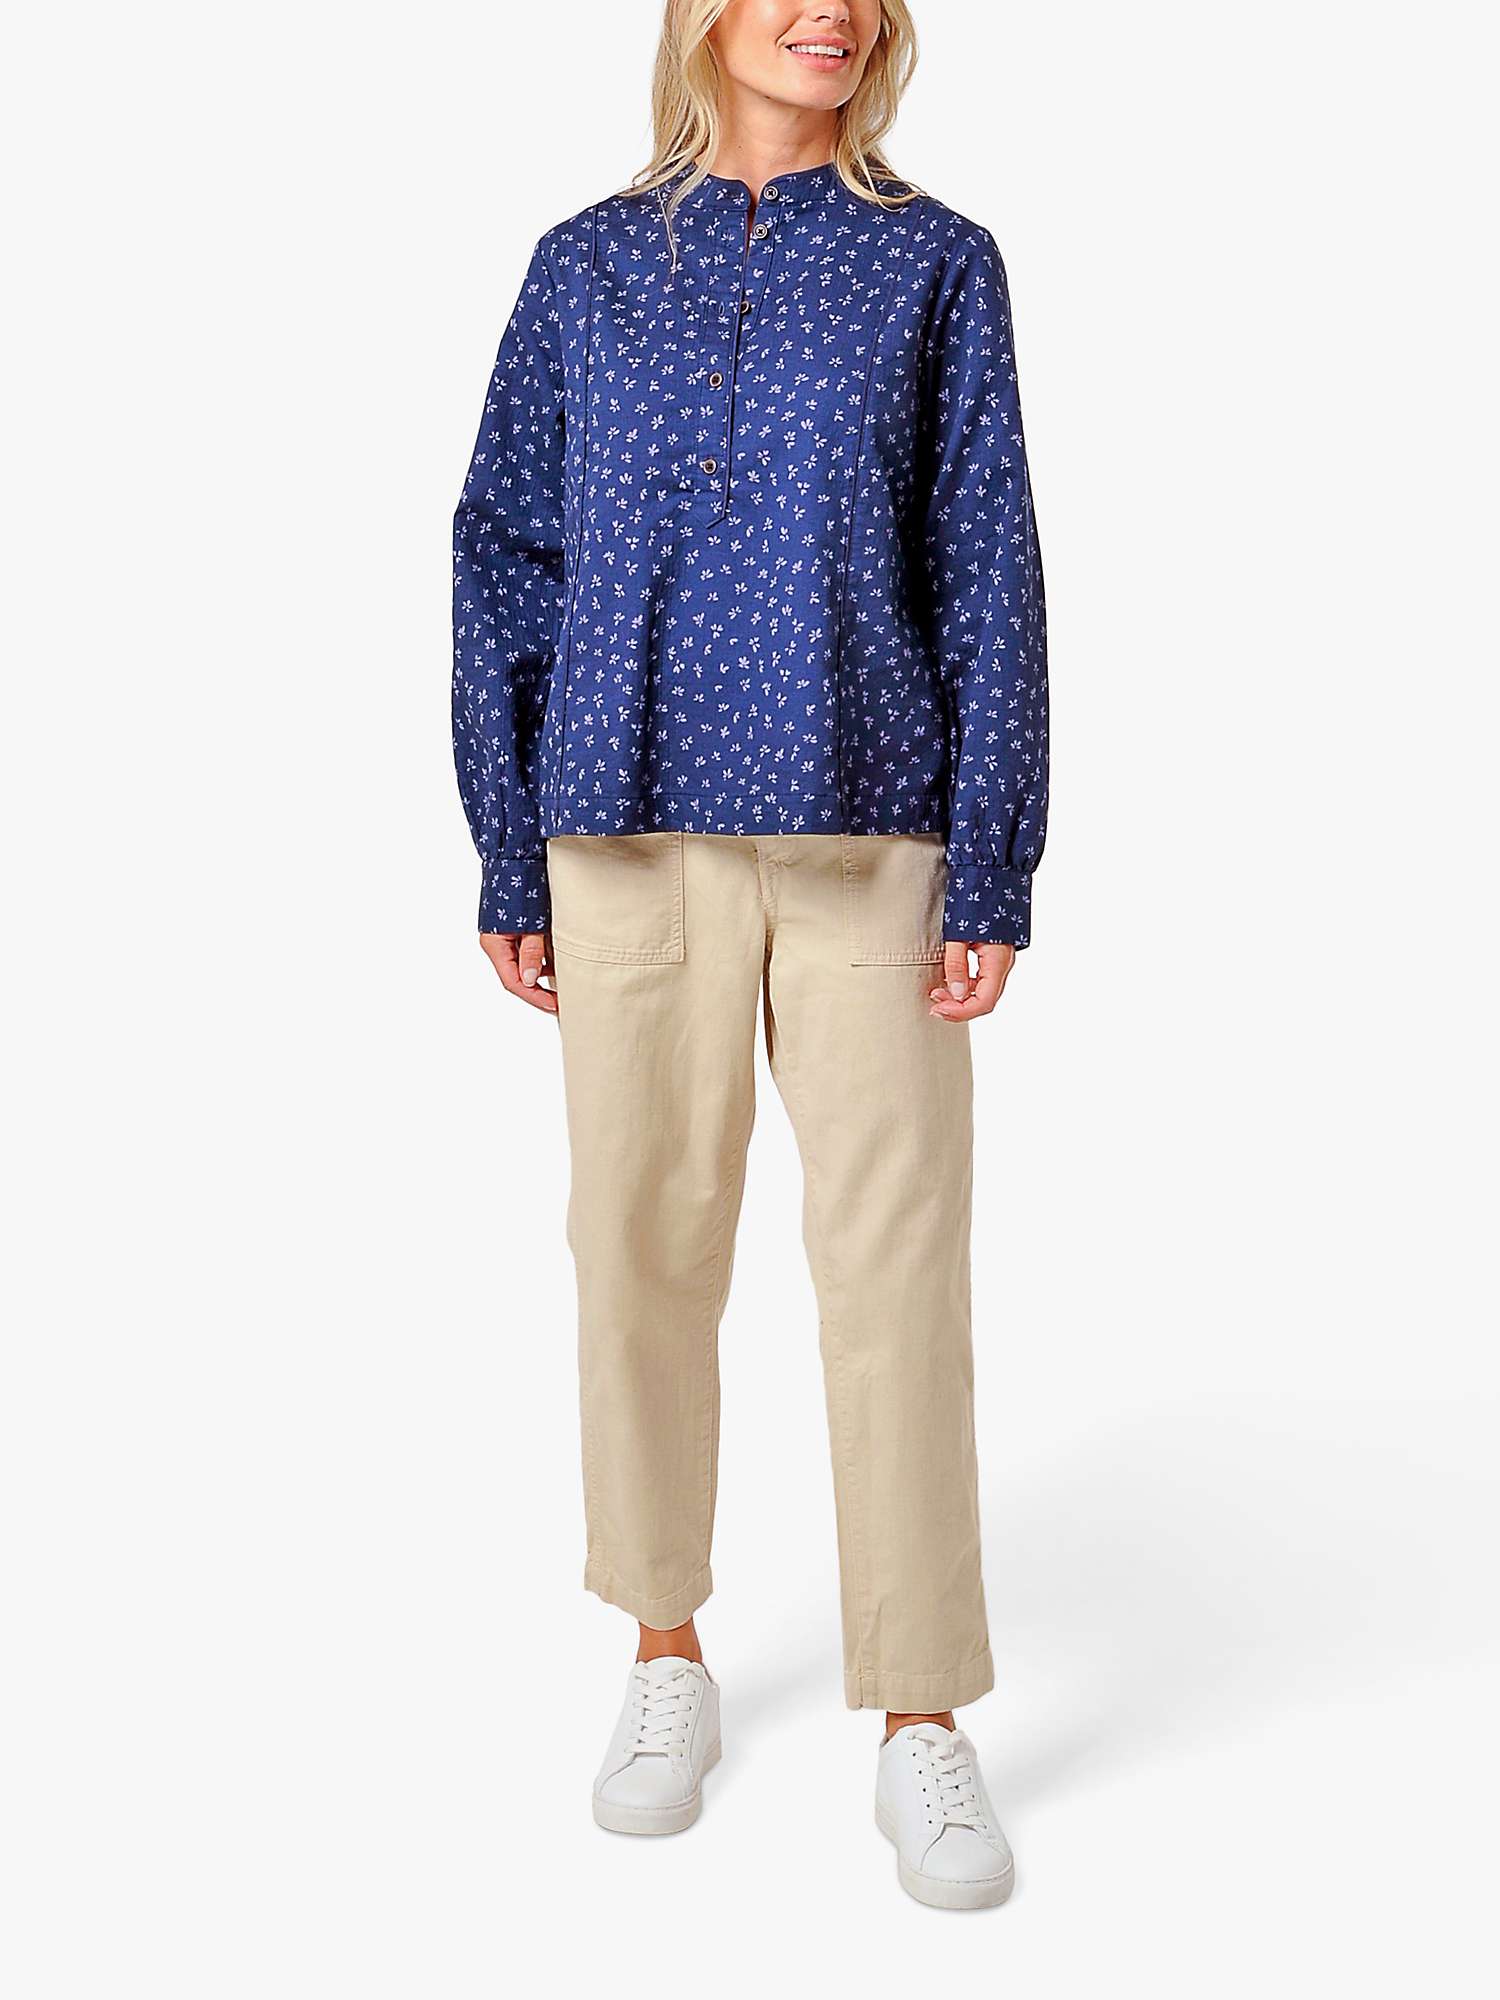 Buy Burgs Abbey Floral Print Shirt, Midnight Navy Online at johnlewis.com